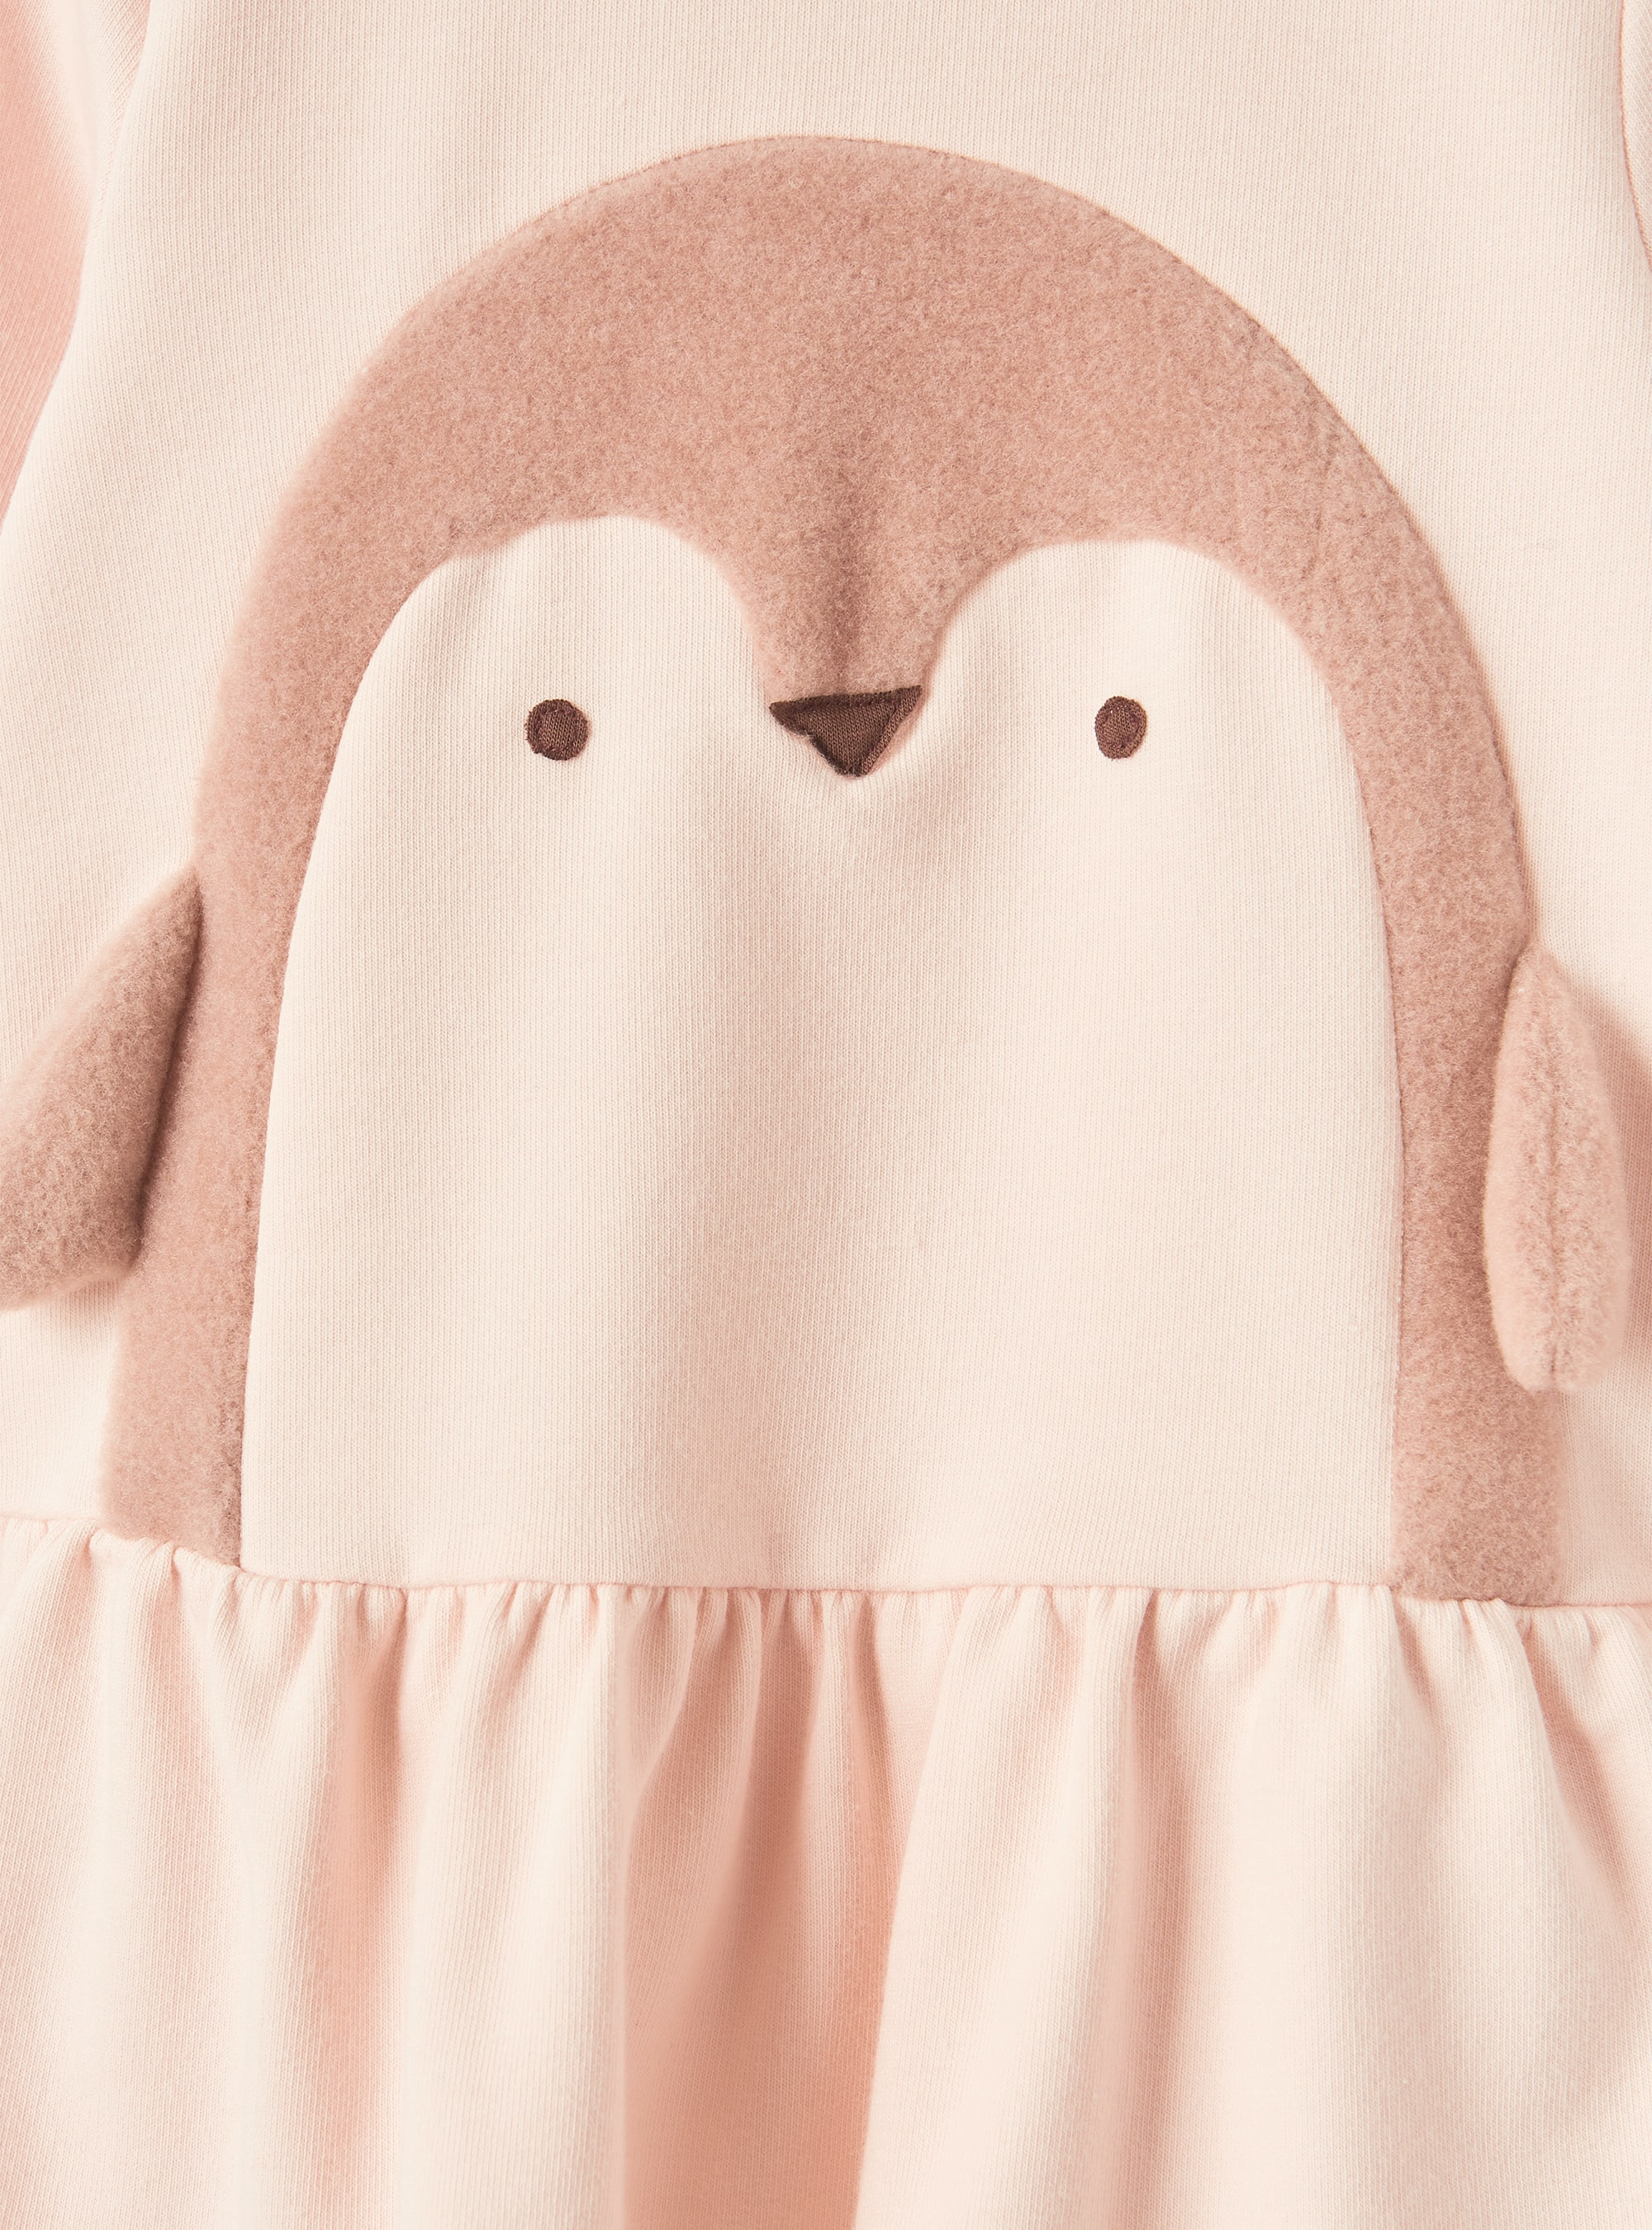 Pink fleece dress with penguin - Pink | Il Gufo